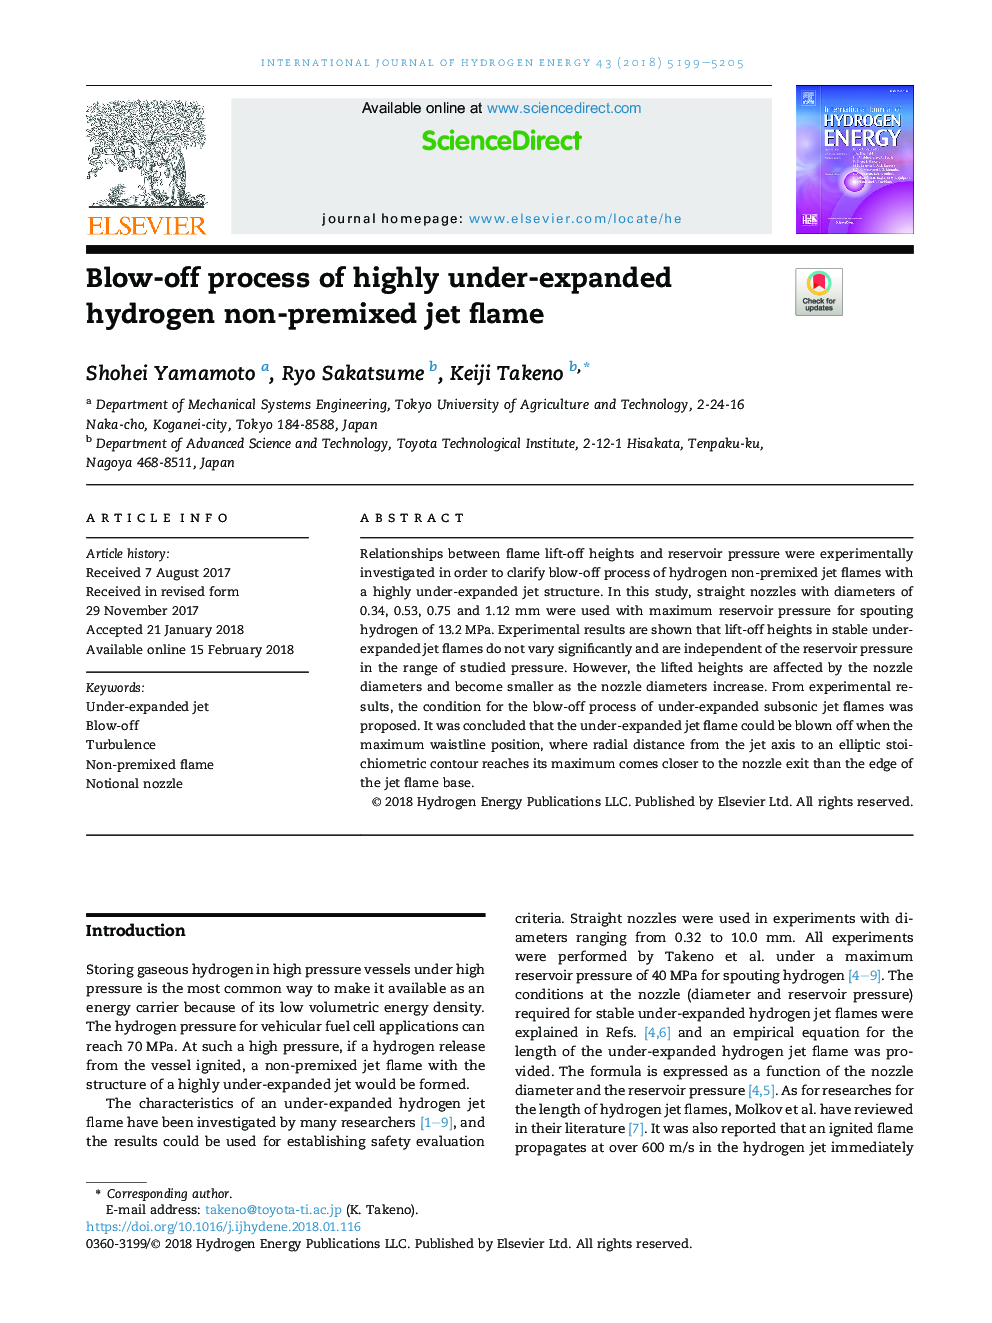 Blow-off process of highly under-expanded hydrogen non-premixed jet flame